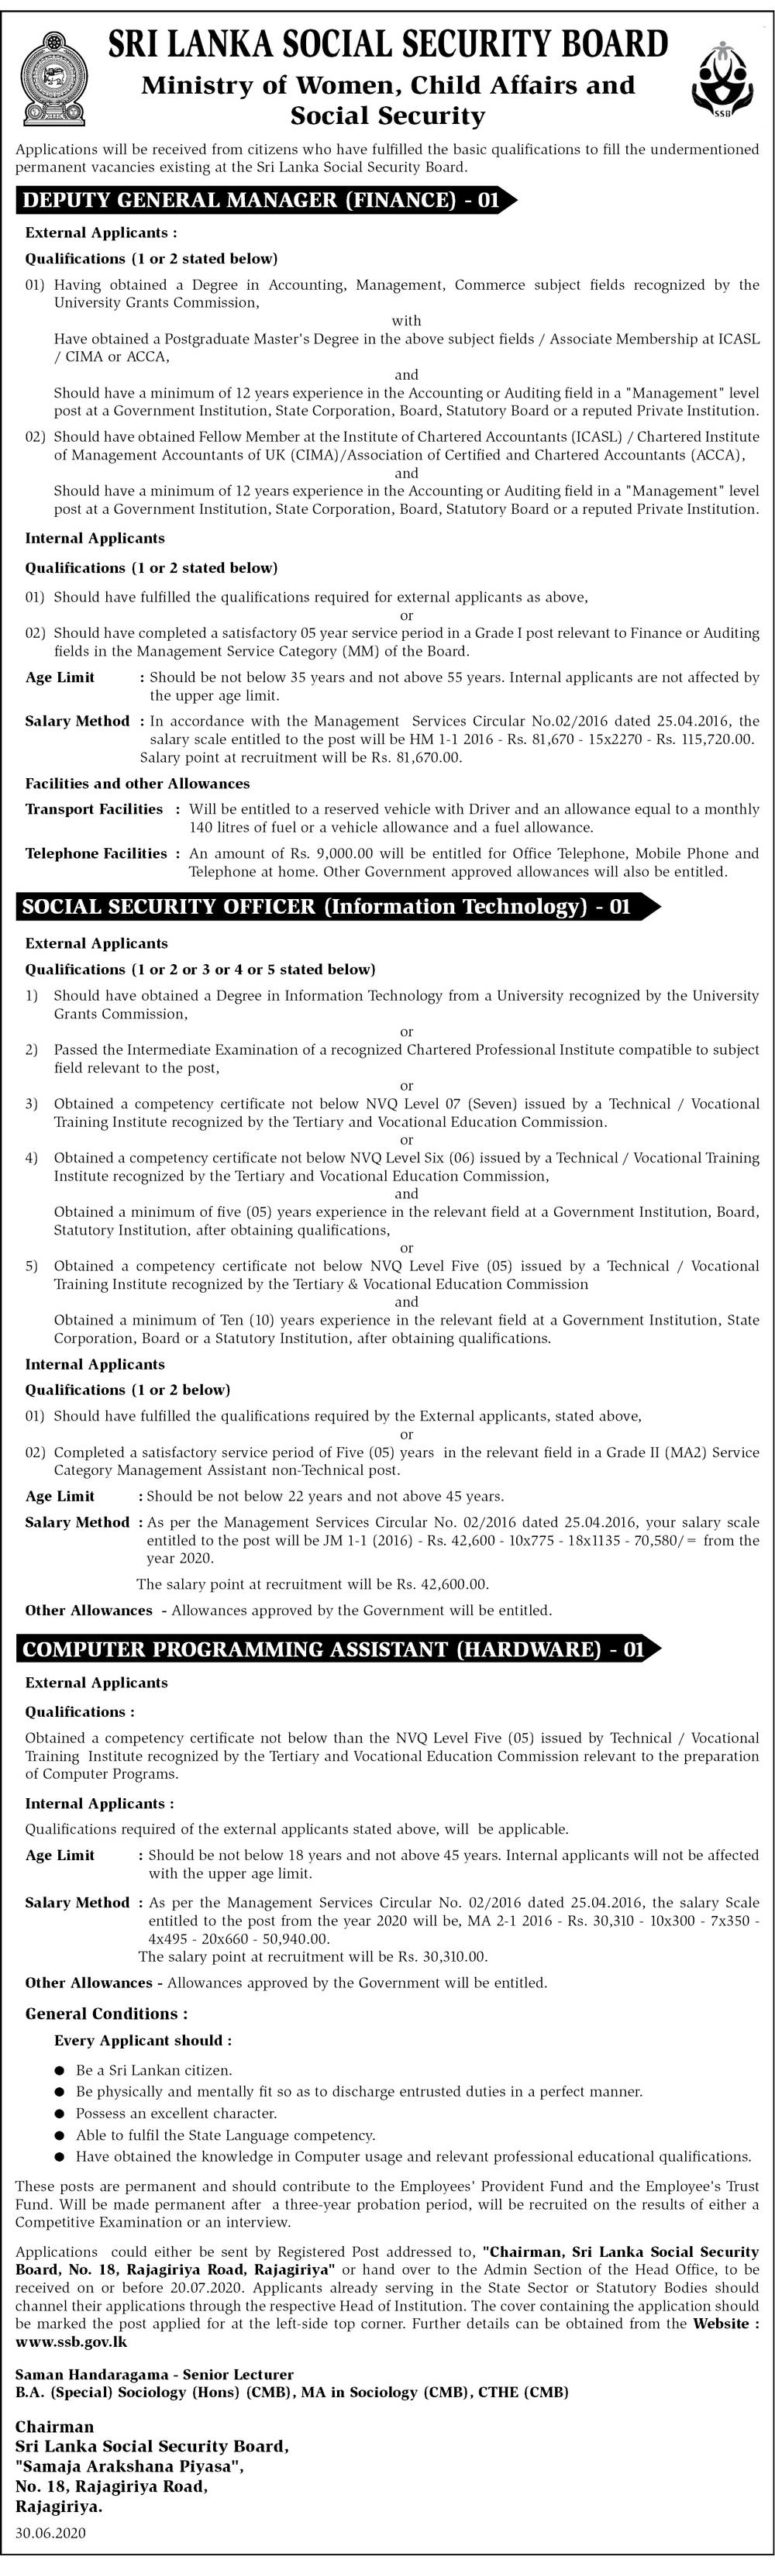 Deputy General Manager (Finance), Social Security Officer (Information Technology), Computer Programming Assistant (Hardware)